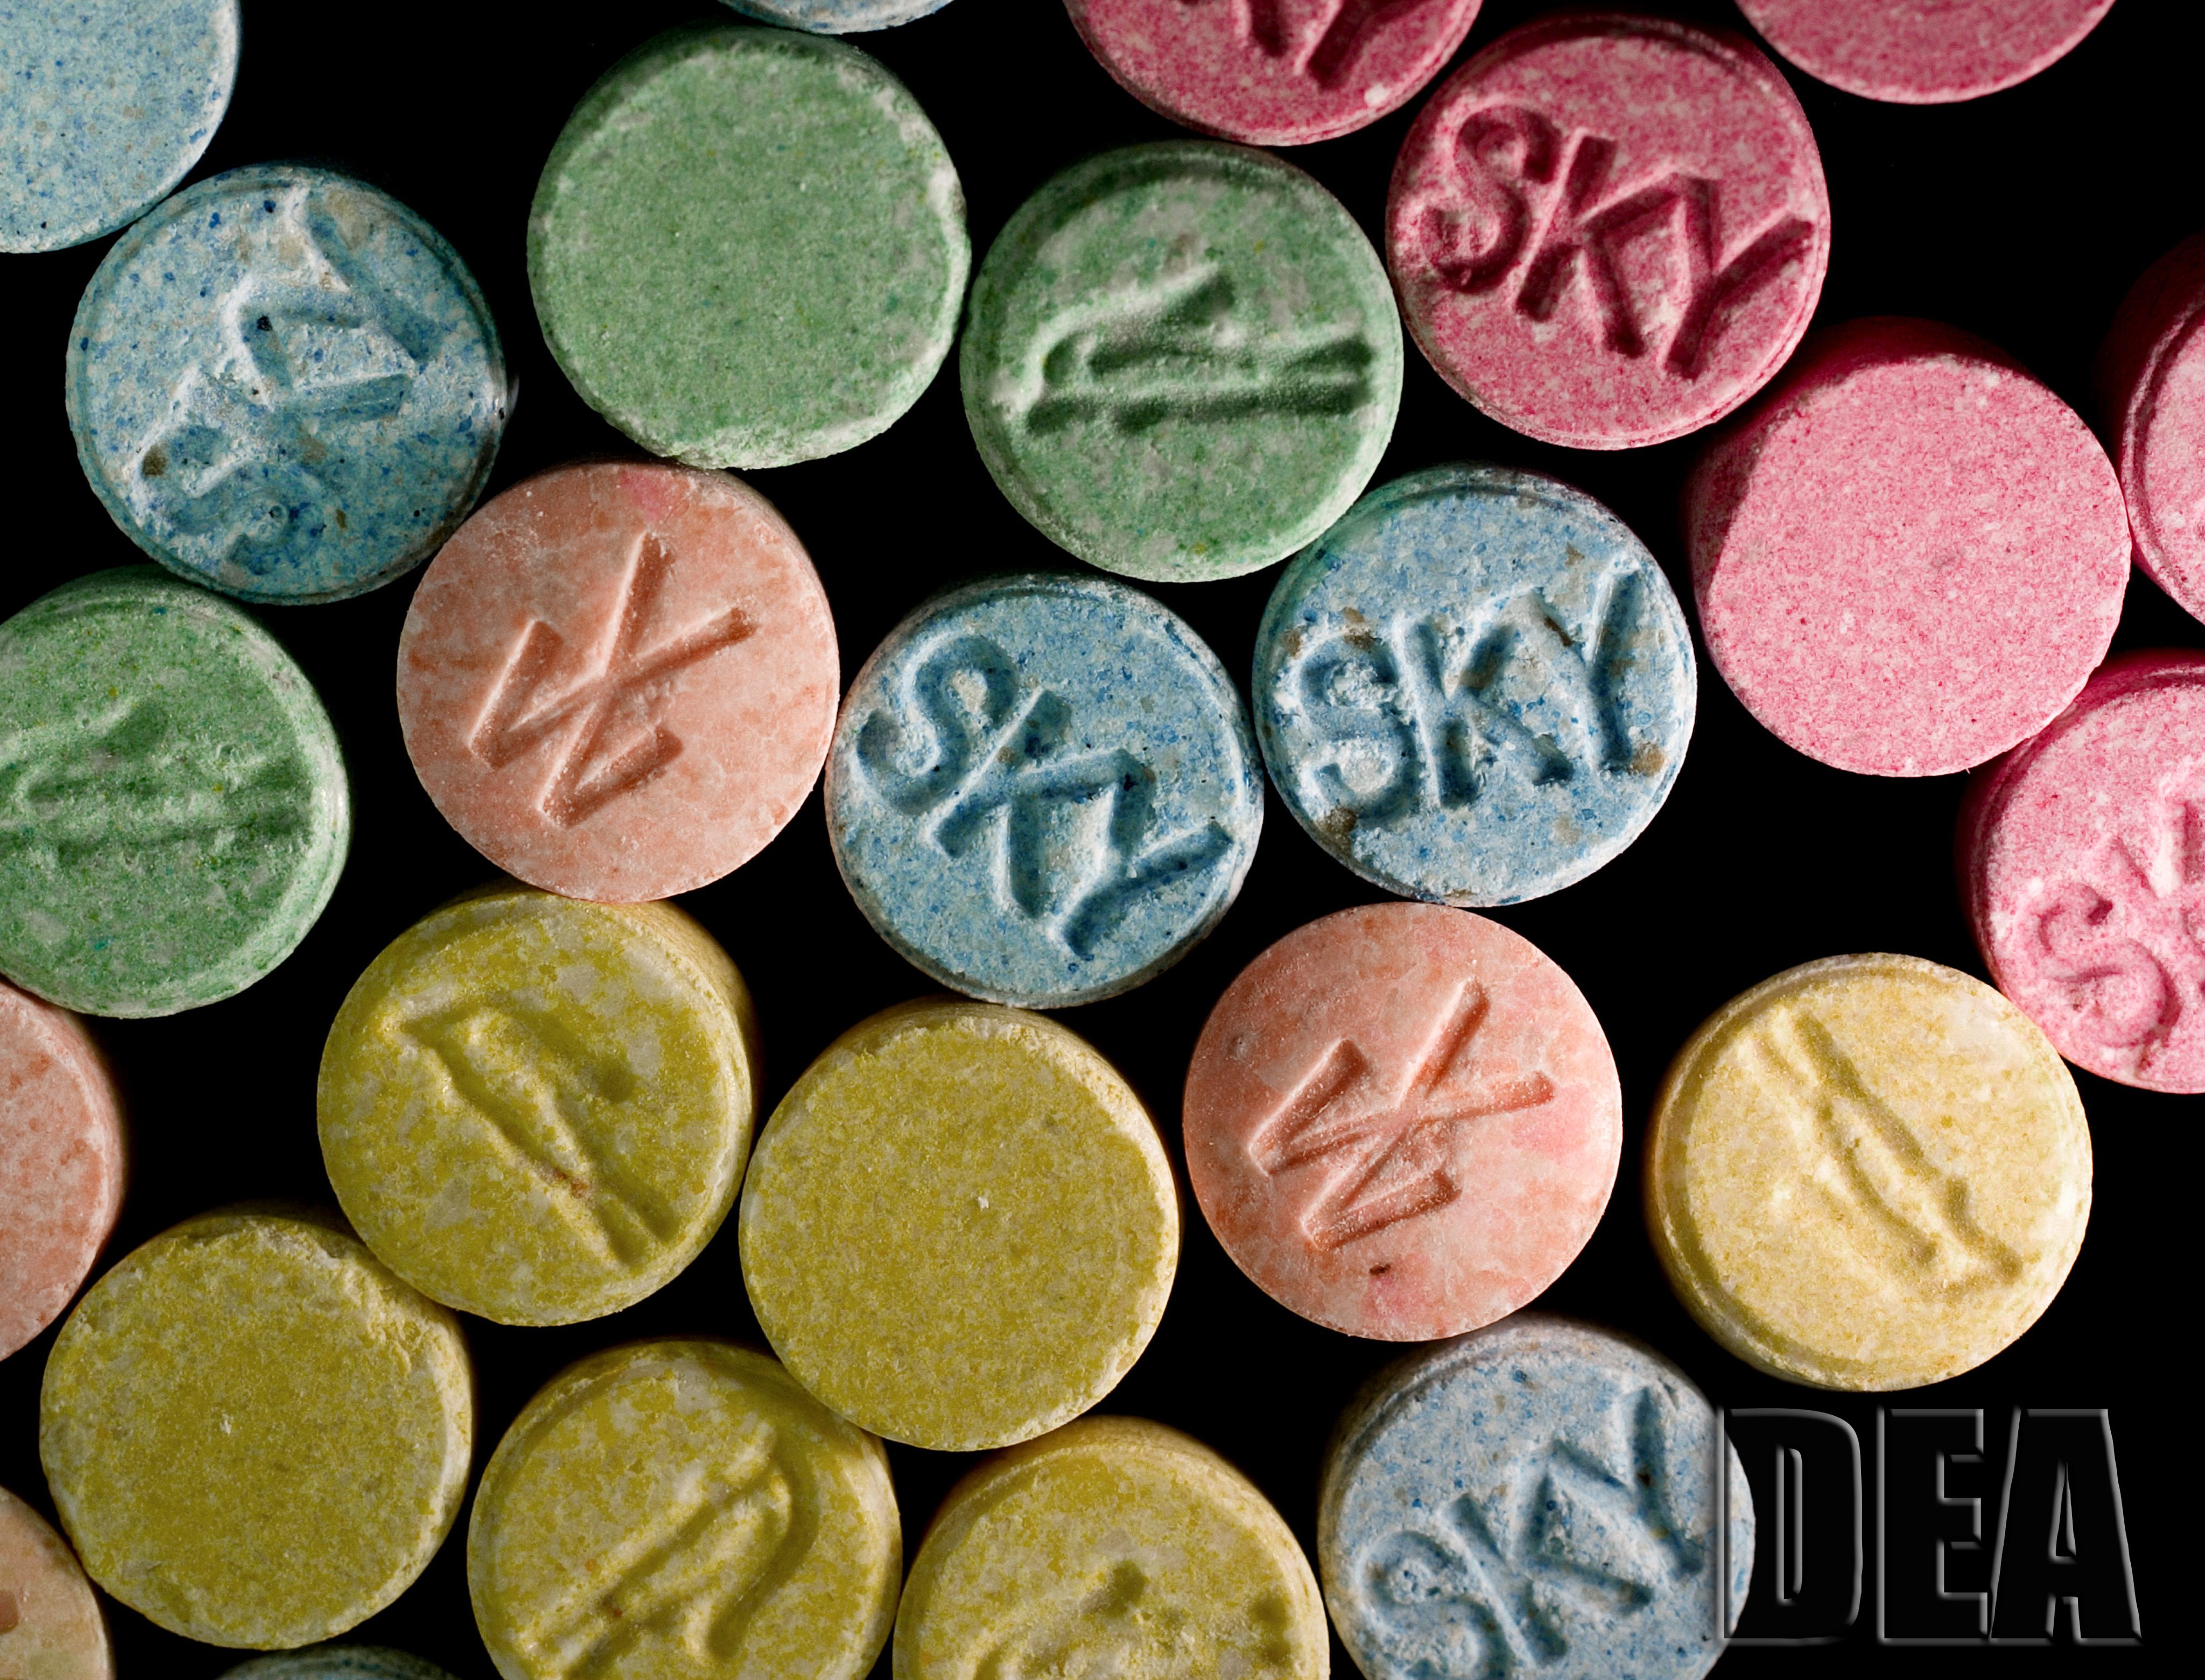 9 things everyone should know about the drug Molly